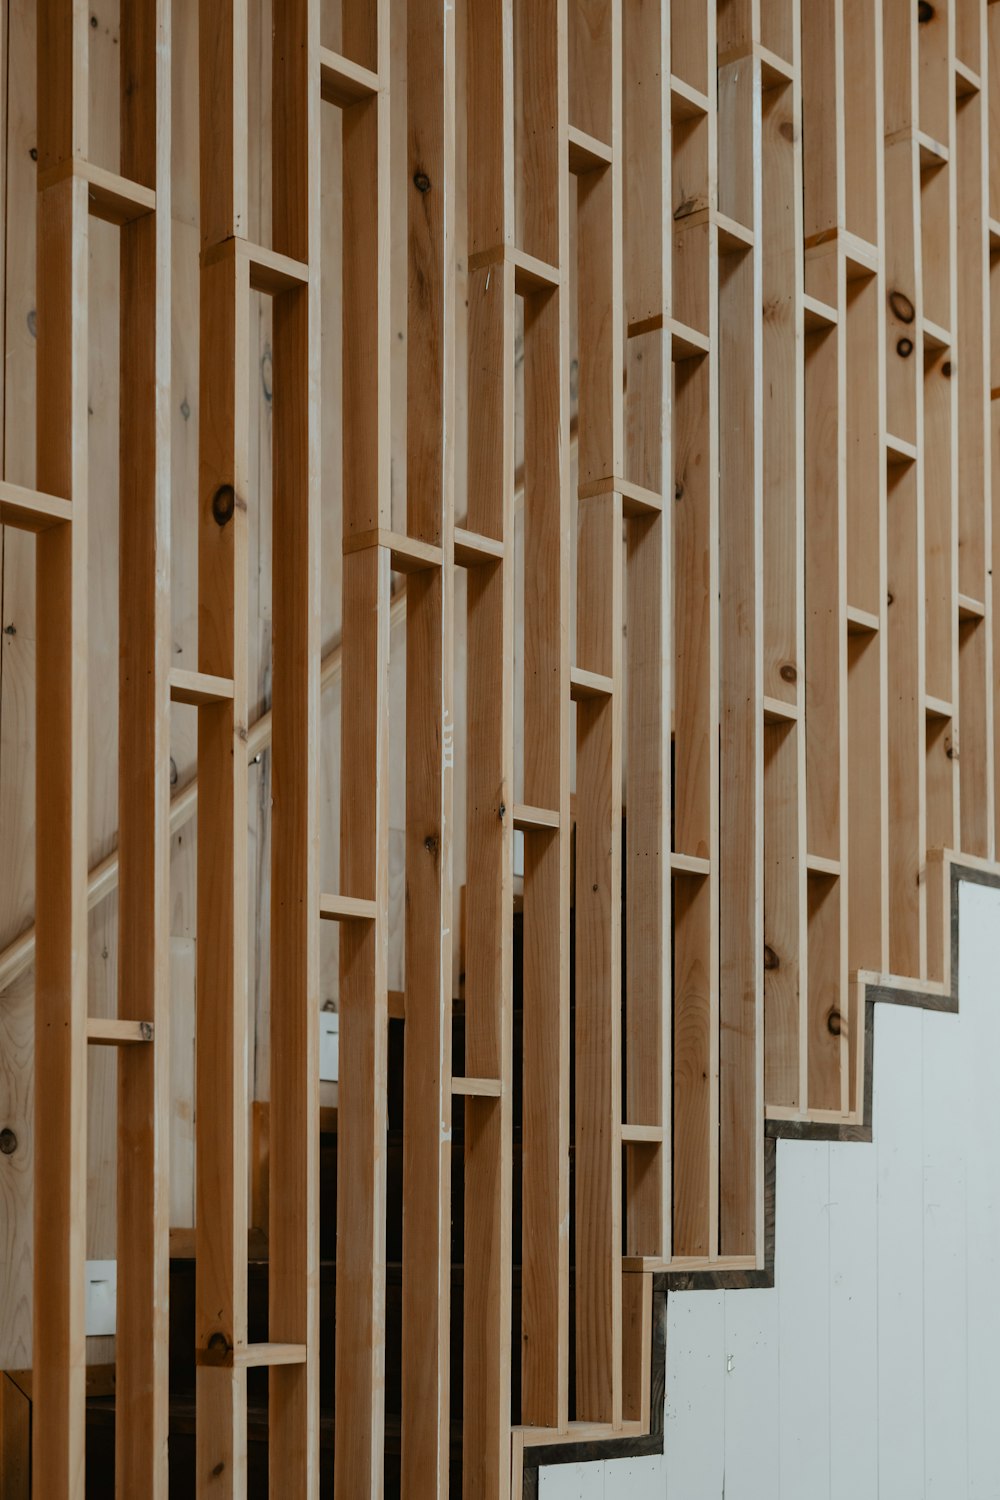 a staircase made of wooden planks in a building